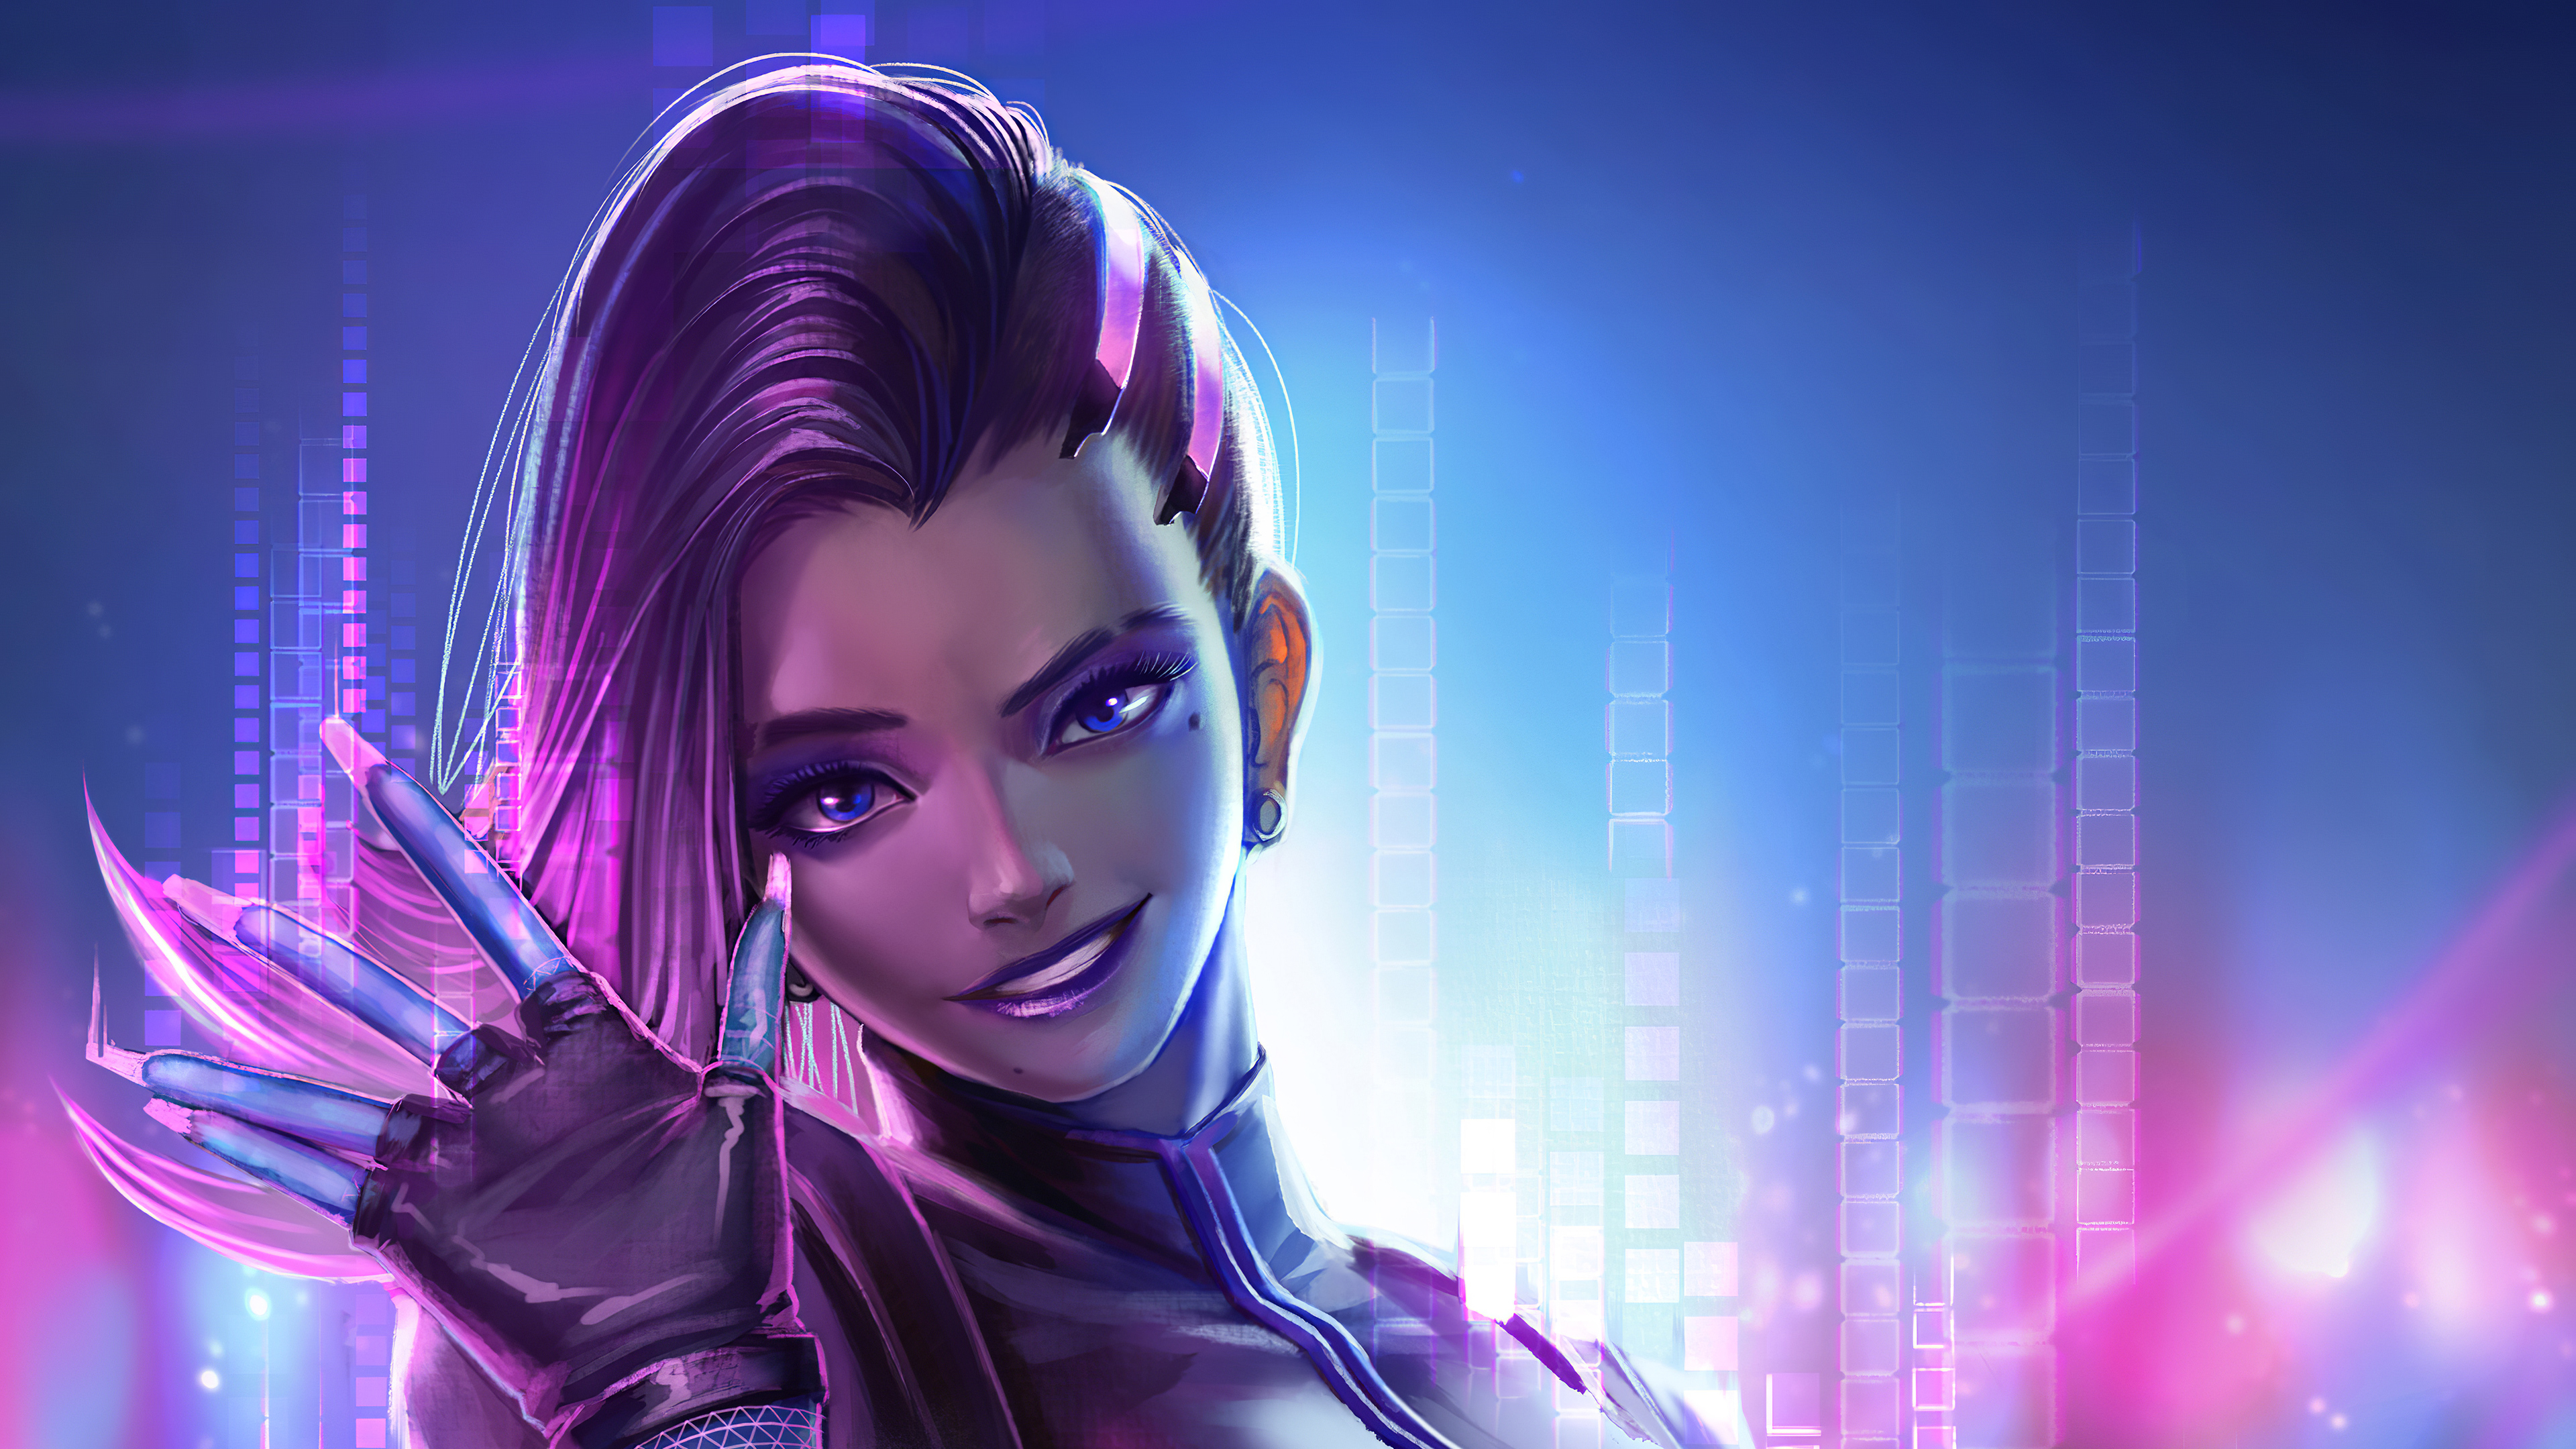 3840x2160 1920x1080 4k Sombra Overwatch Laptop Full HD 1080P HD 4k Wallpapers, Images, Backgrounds, Photos and Pictures